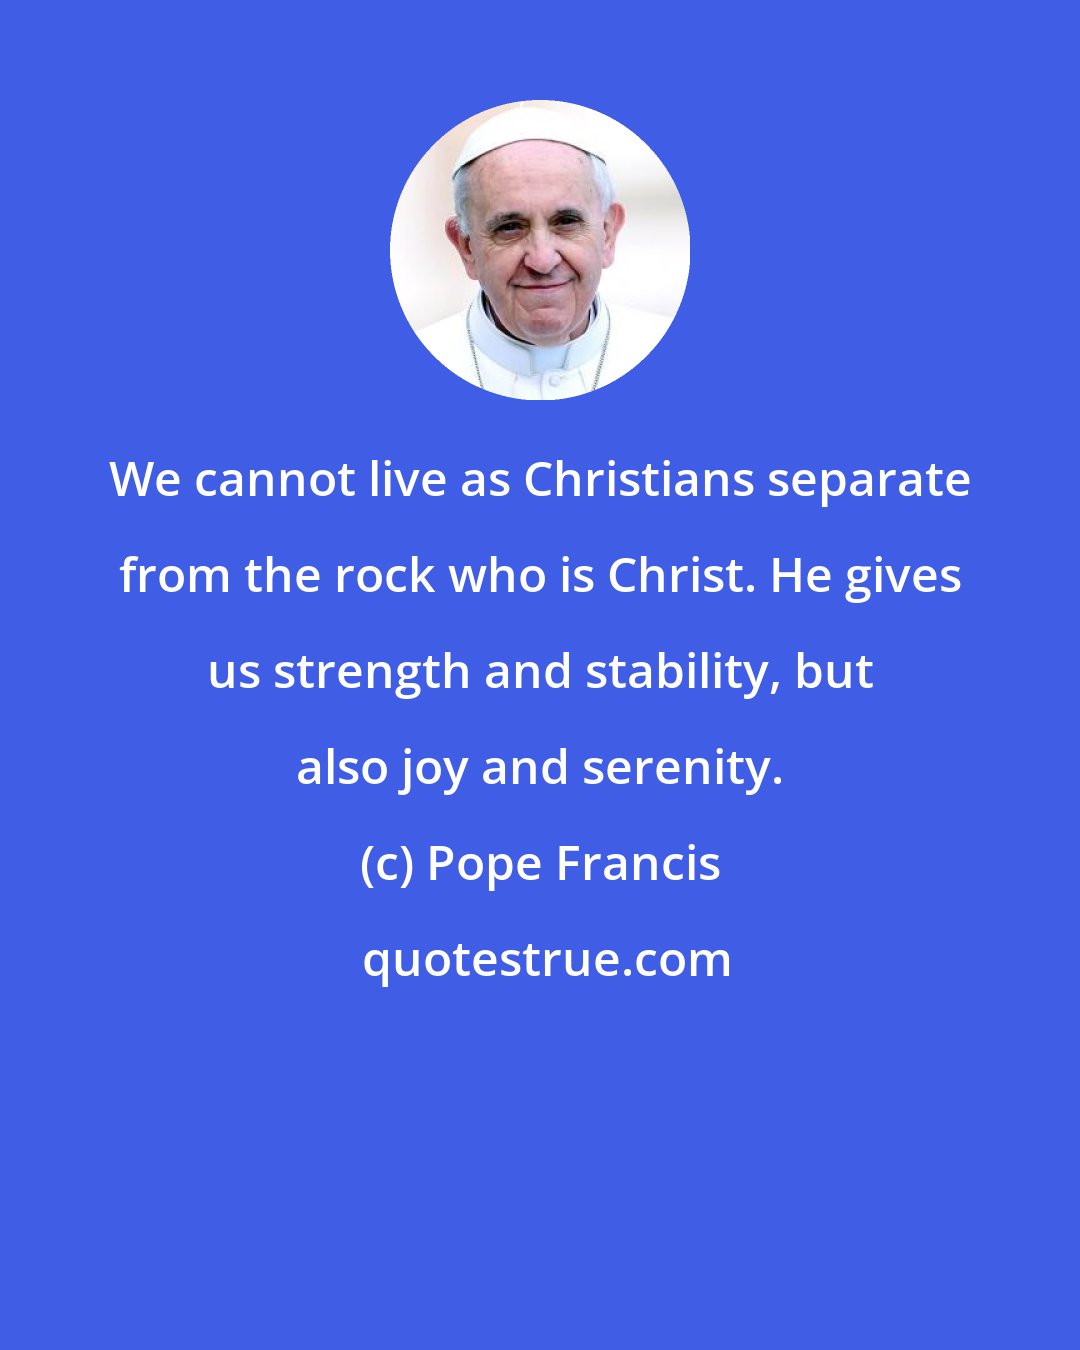 Pope Francis: We cannot live as Christians separate from the rock who is Christ. He gives us strength and stability, but also joy and serenity.